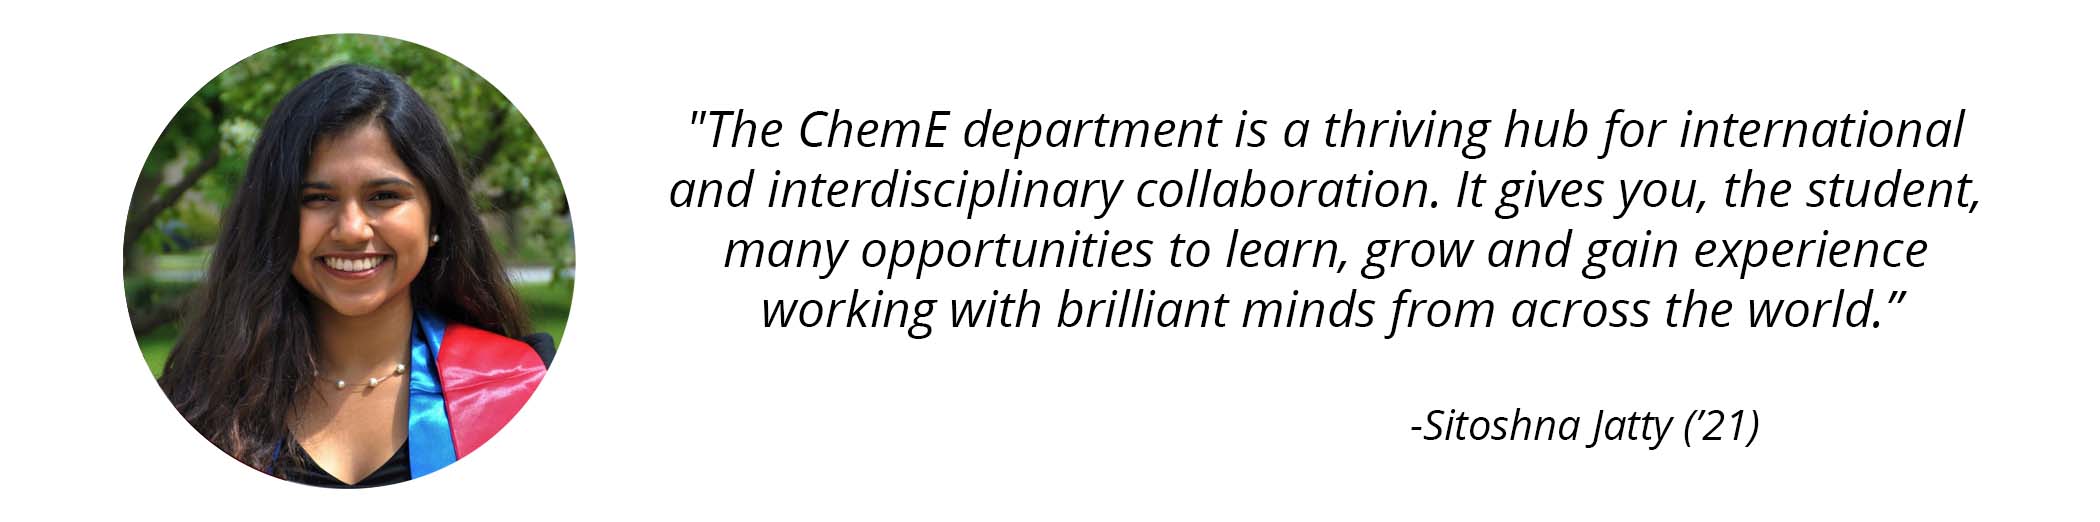 Sitoshna Jatty ('21) photo and quote - "The ChemE department is a thriving hub for international and interdisciplinary collaboration. It gives you, the student, many opportunities to learn, grow and gain experience working with brilliant minds from across the world." 